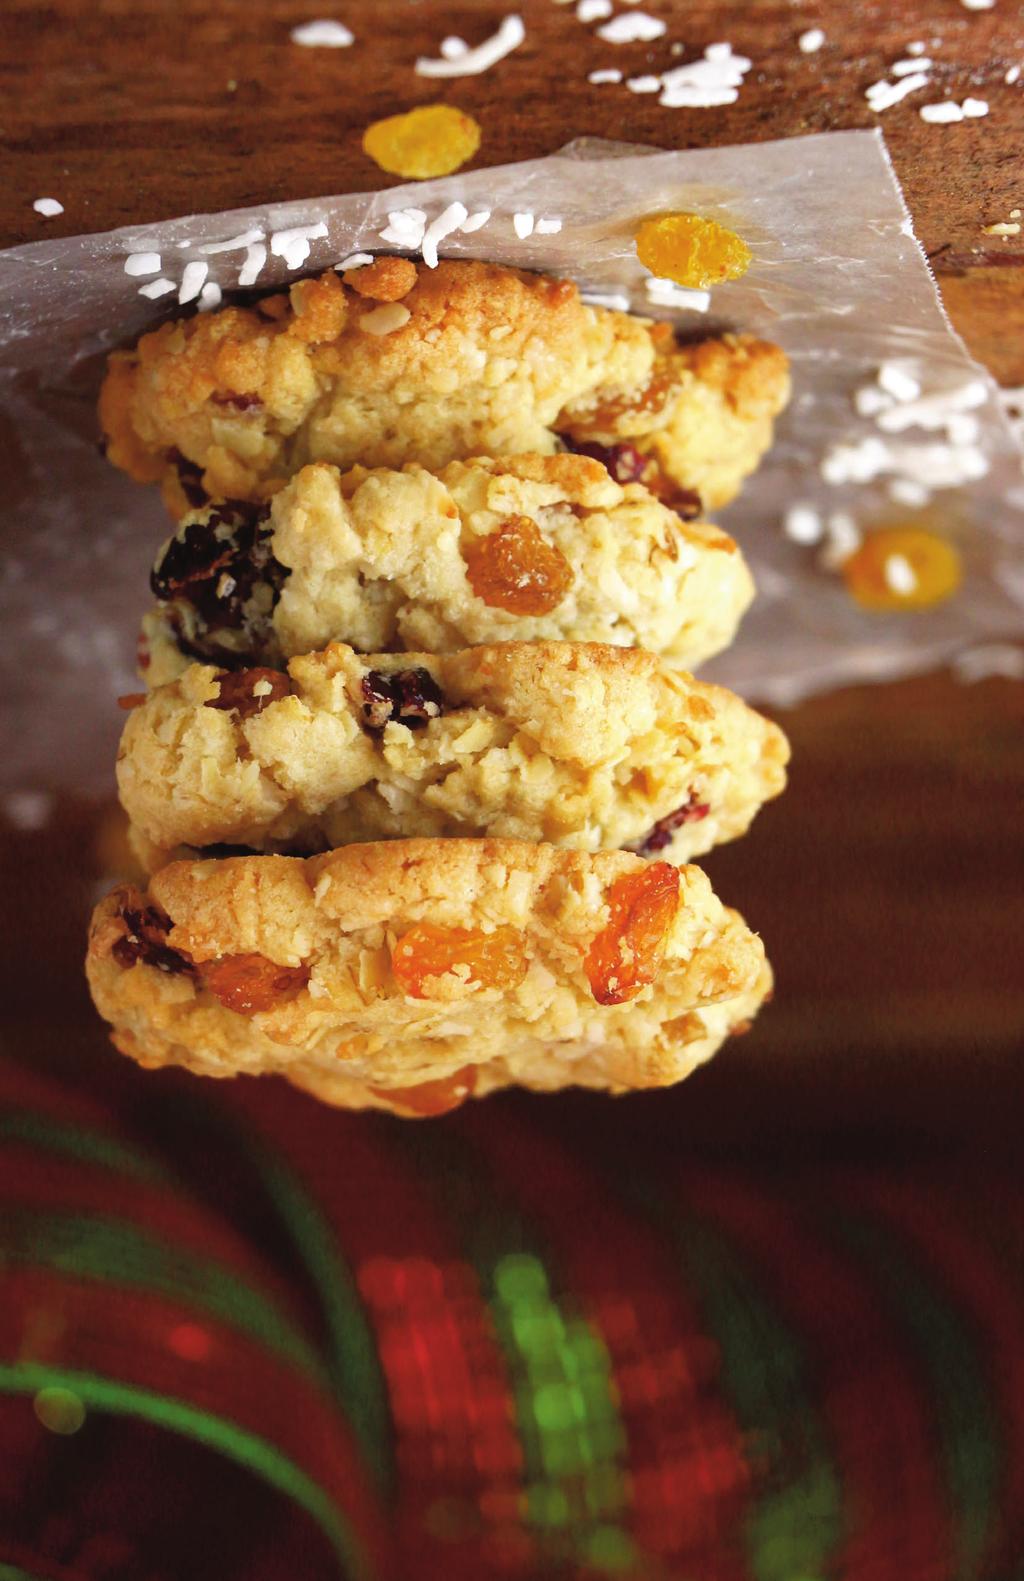 Cowboy Cookies This old recipe has been a favourite for years. The combination of coconut and dried fruits is a perfect one. Try any combination - how about dried pineapple for a Hawaiian version?